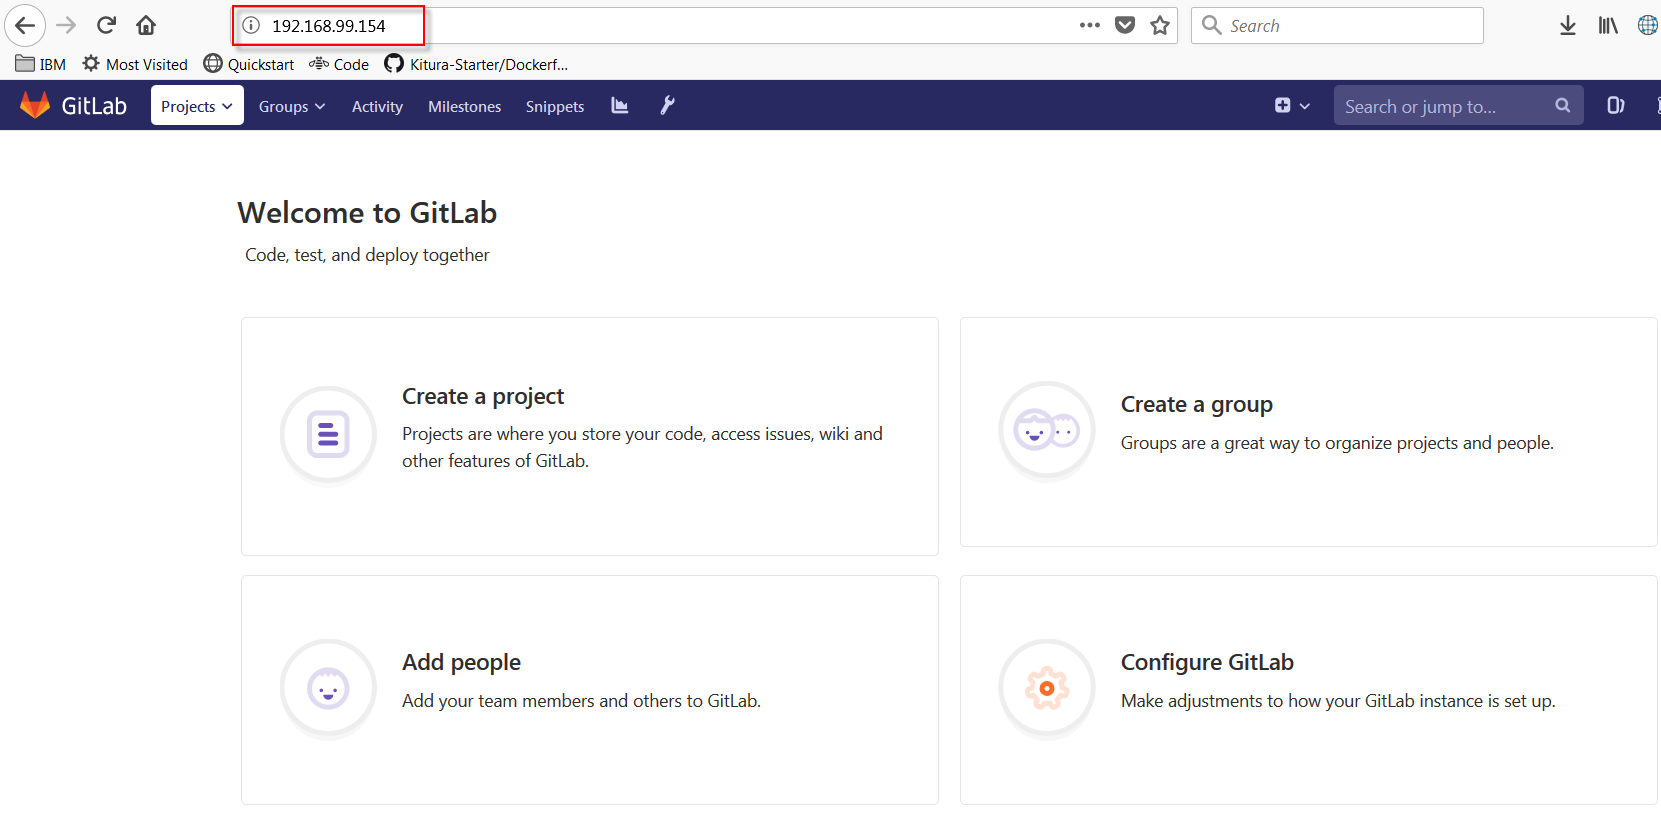 GitLab configured for code check-in